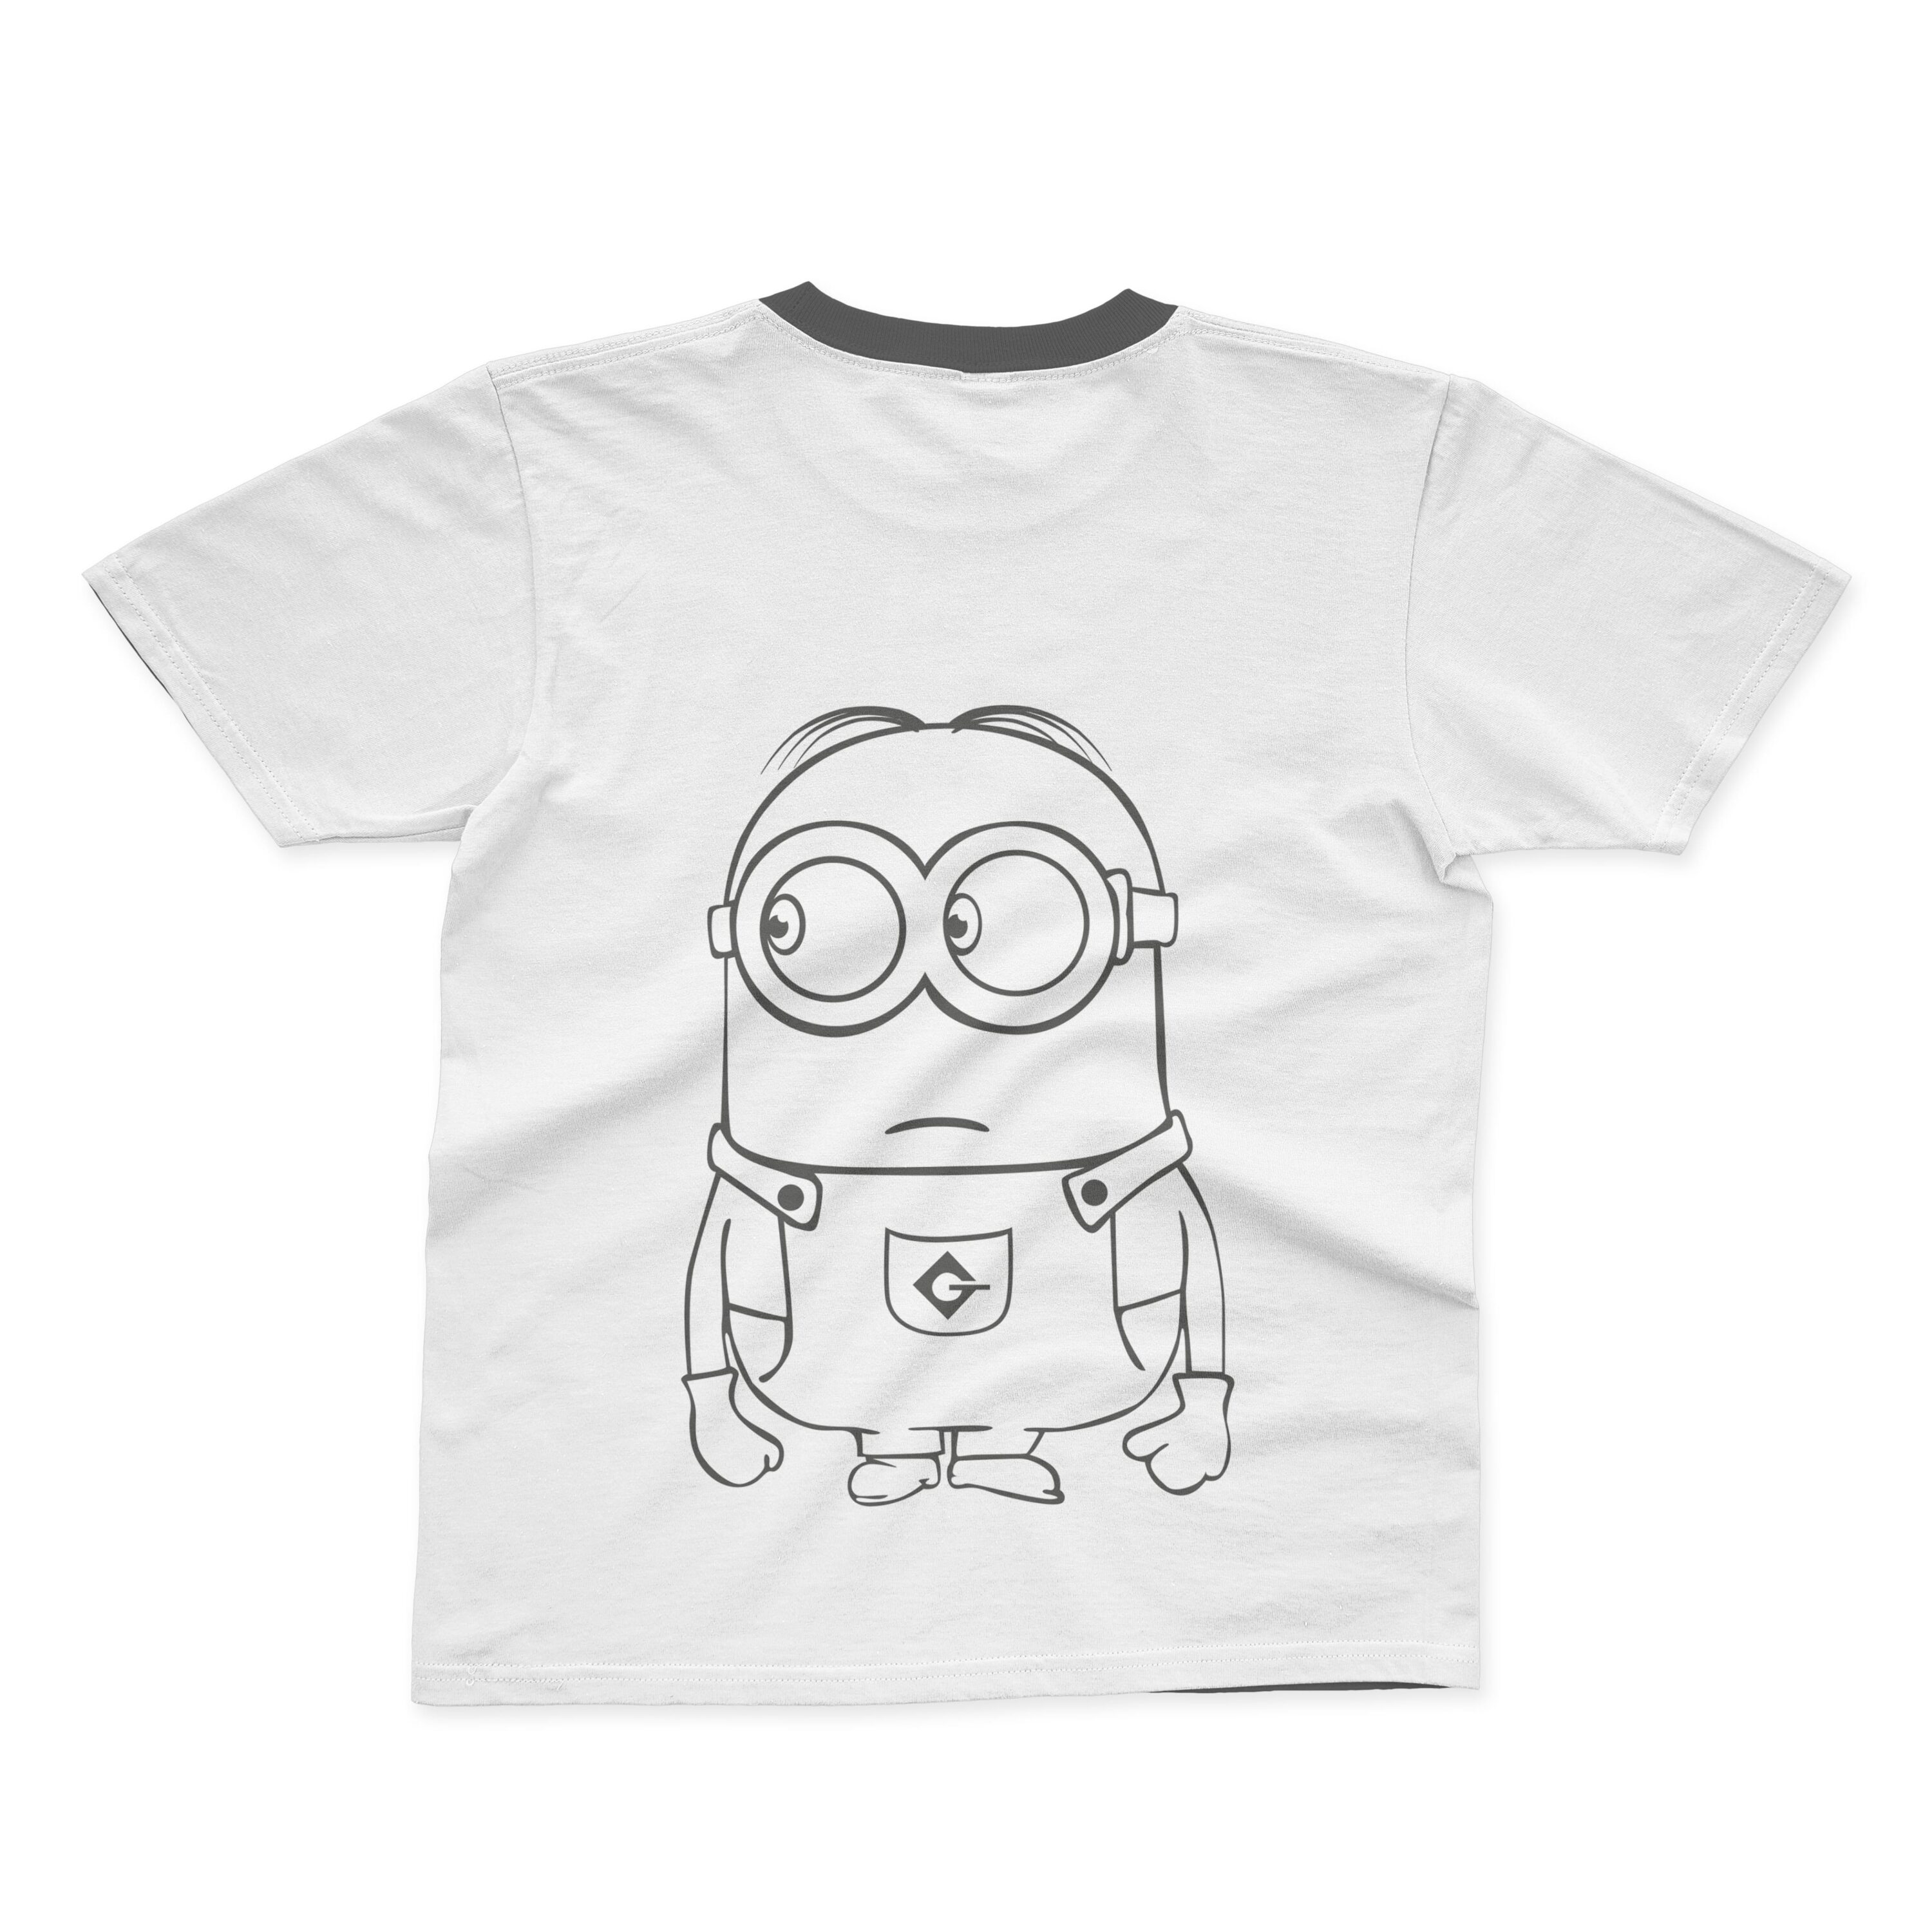 A white T-shirt with a black collar and an outline of a sad minion.